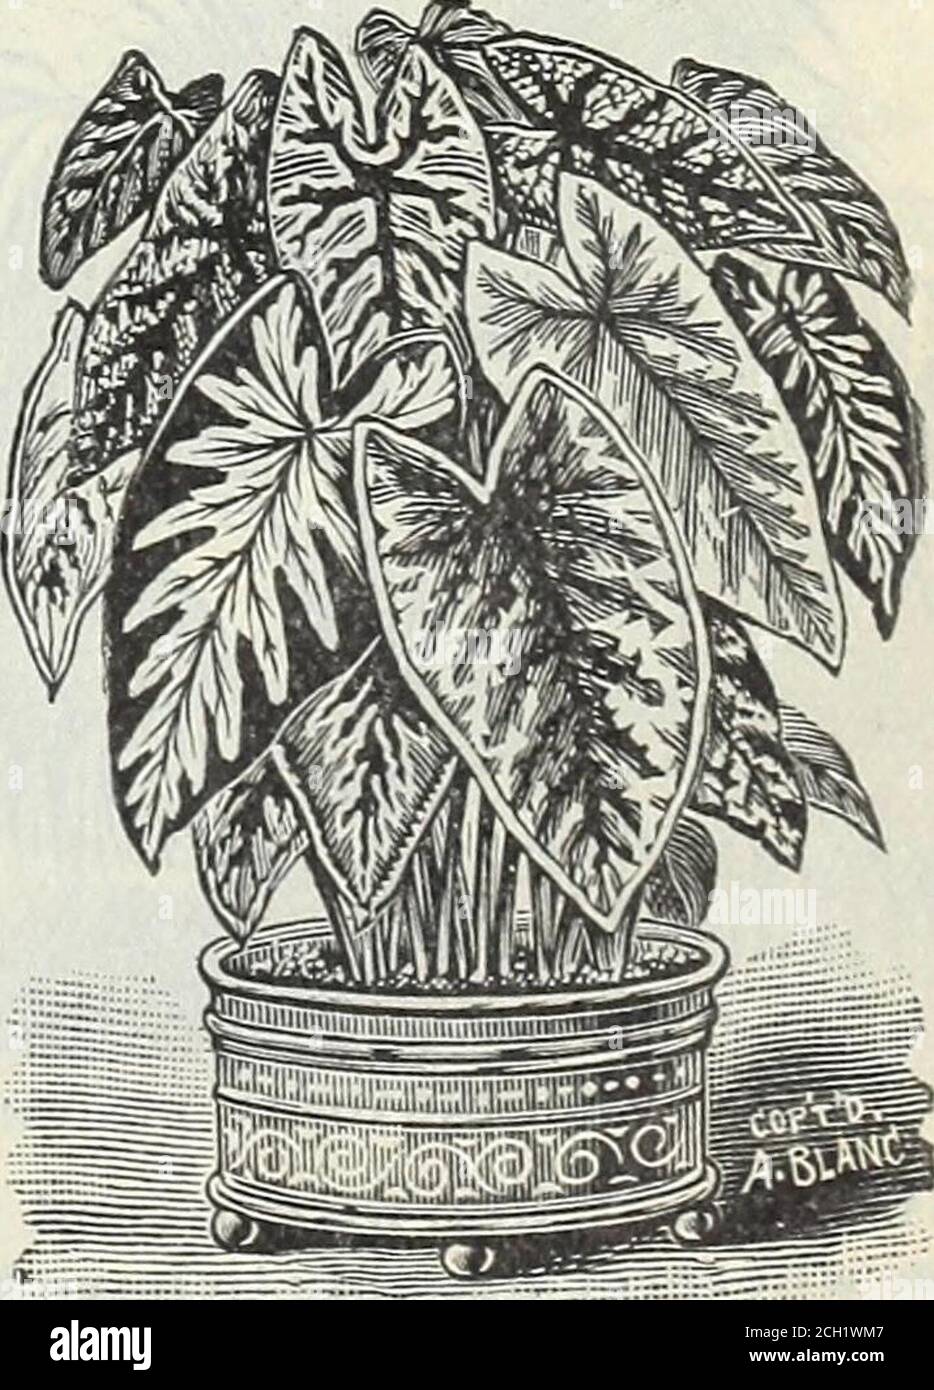 . Our new guide to rose culture : 1898 . STROBILANTHES DYERIANUS.. FANCY-LEAVED CALADITJMS. CHOICE Palms and Ornamental Foliage Plants* Stock Photo